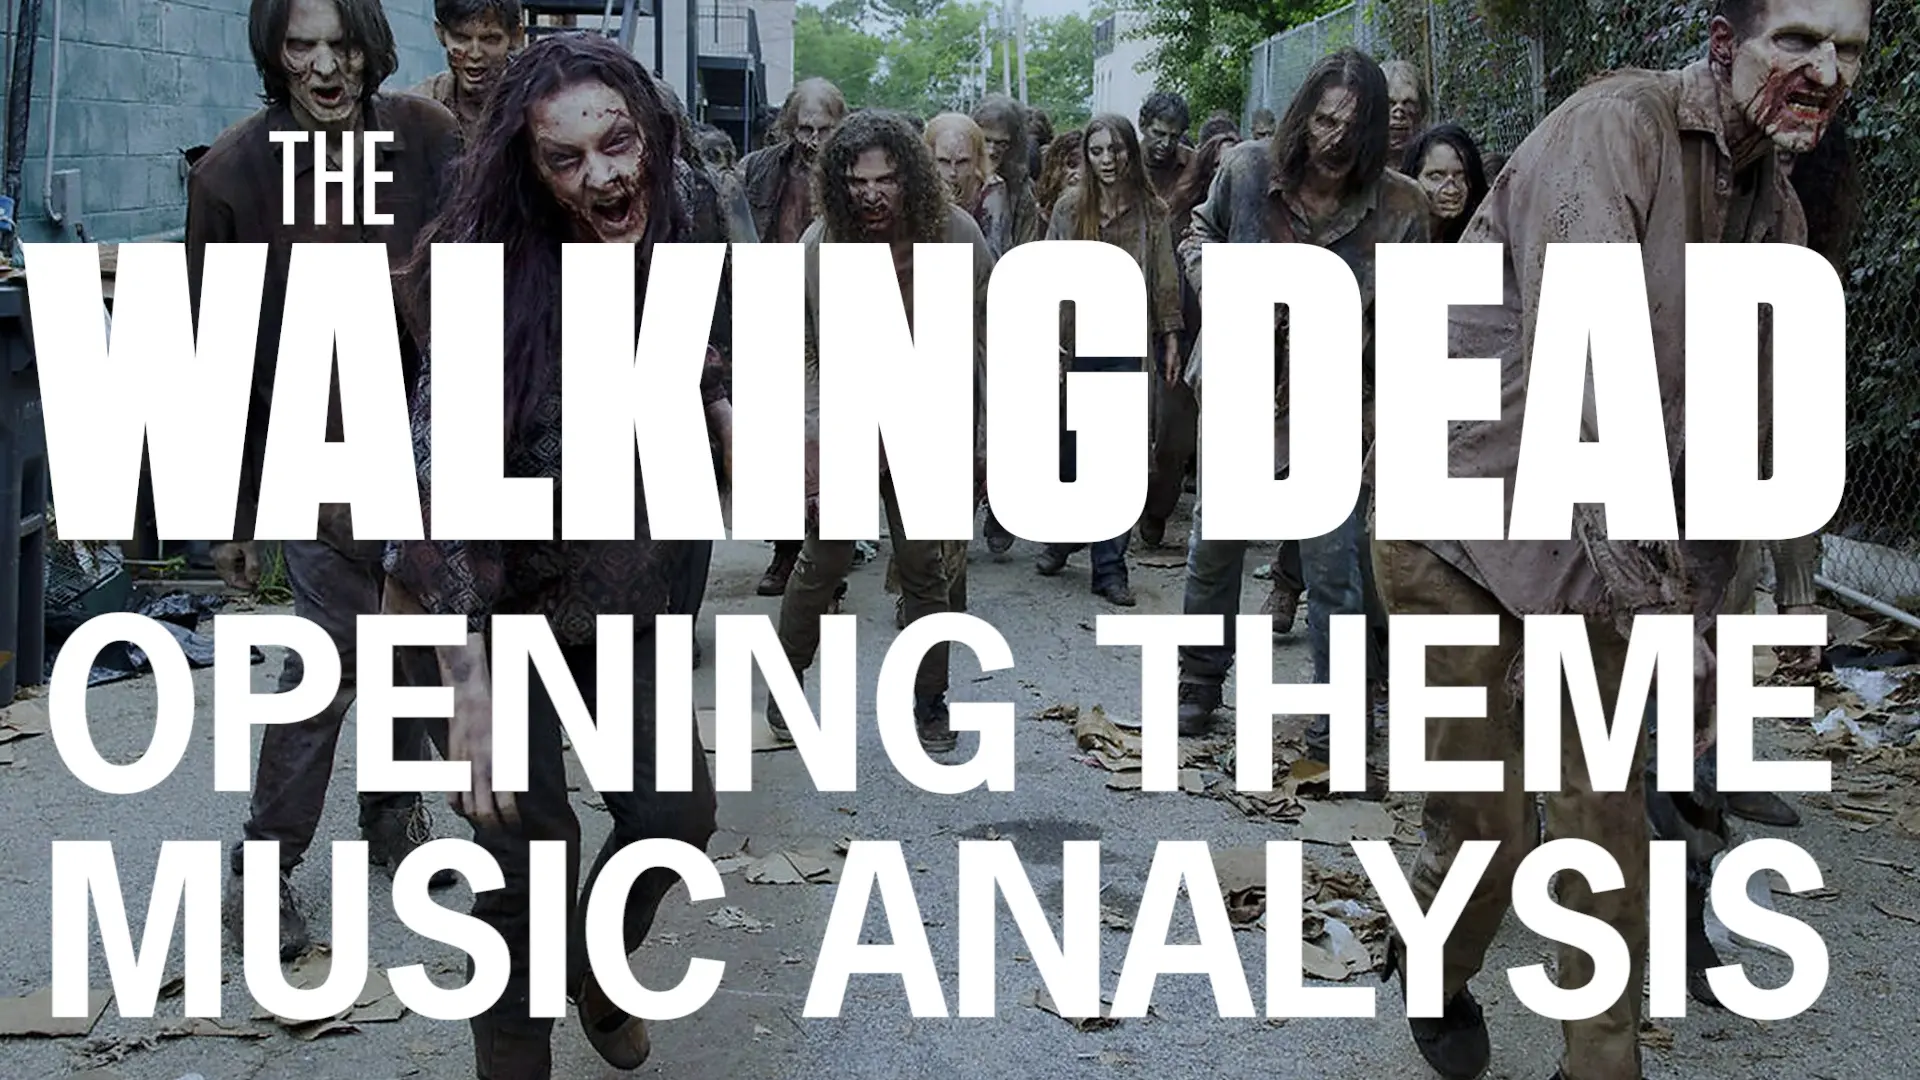 The walking dead opening theme music analysis with a music producer.